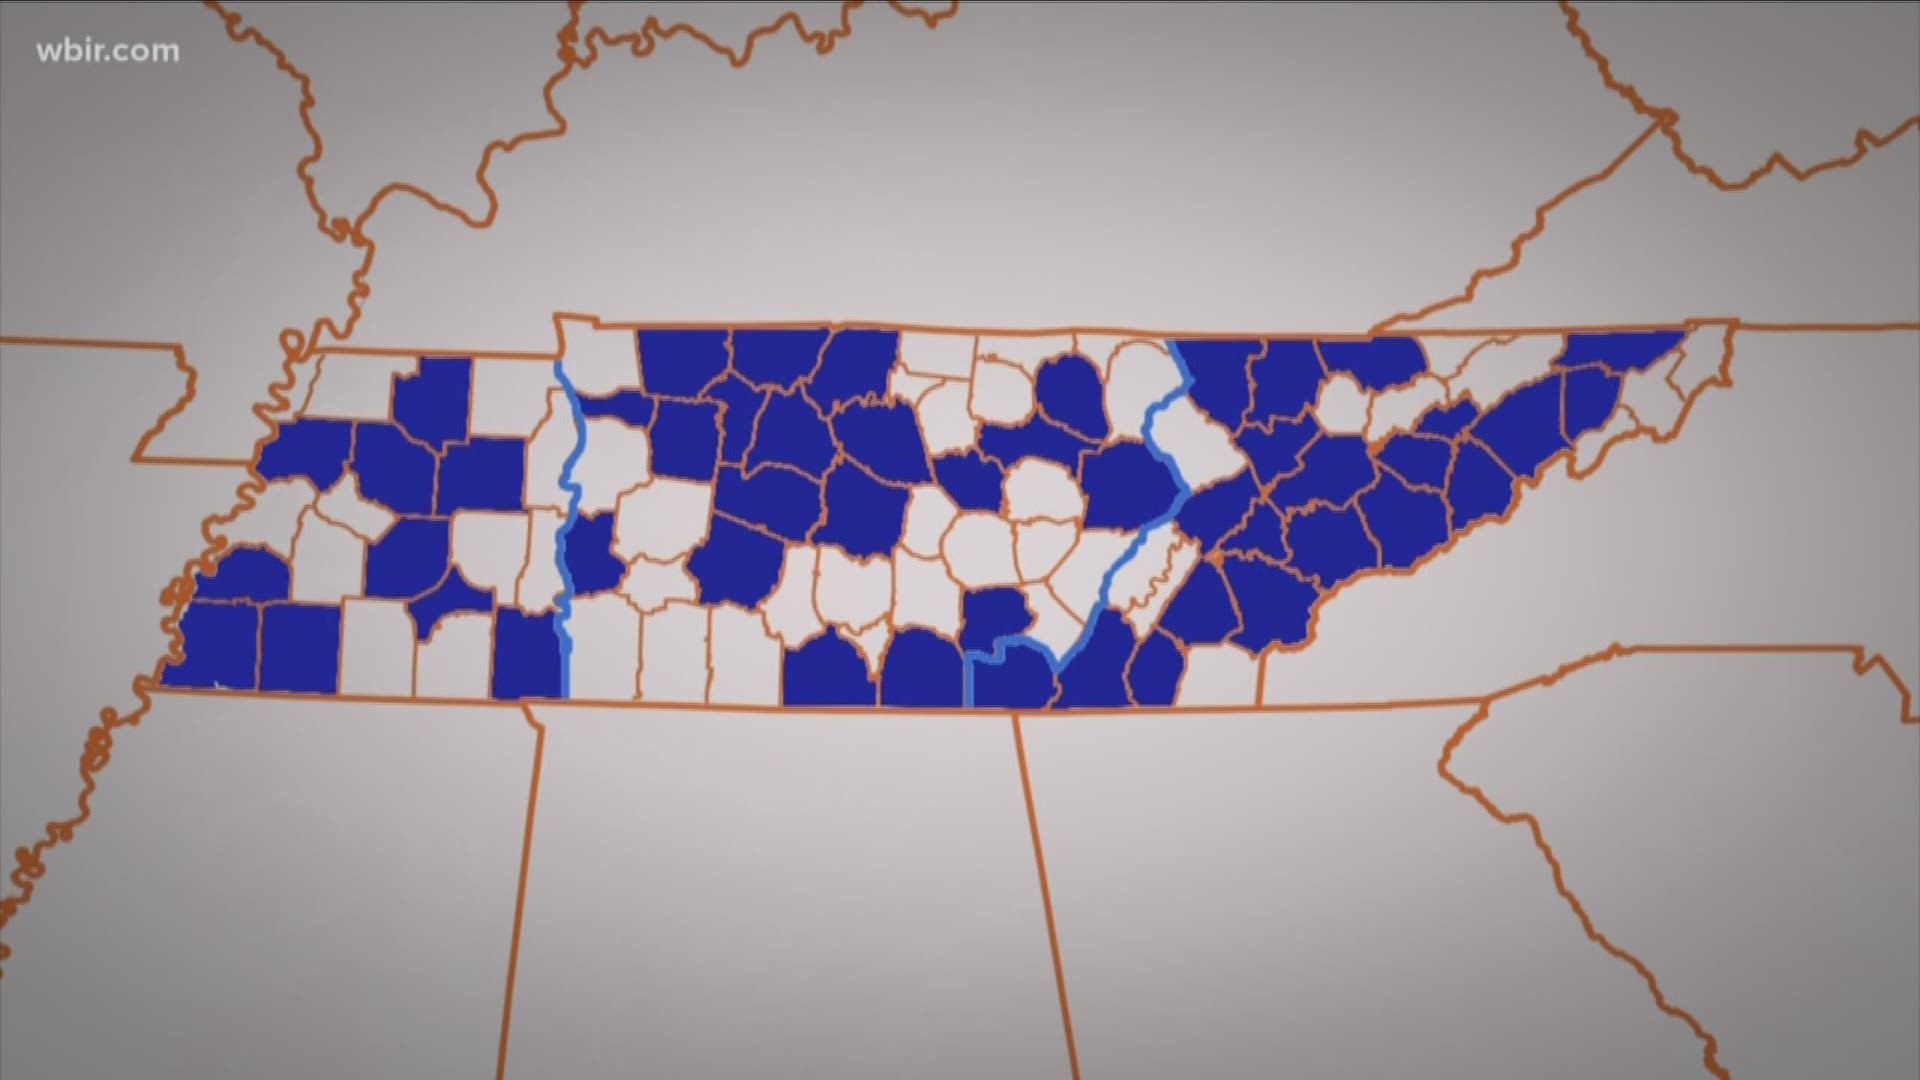 More than half of all Tennessee counties are reporting at least one case of COVID-19.